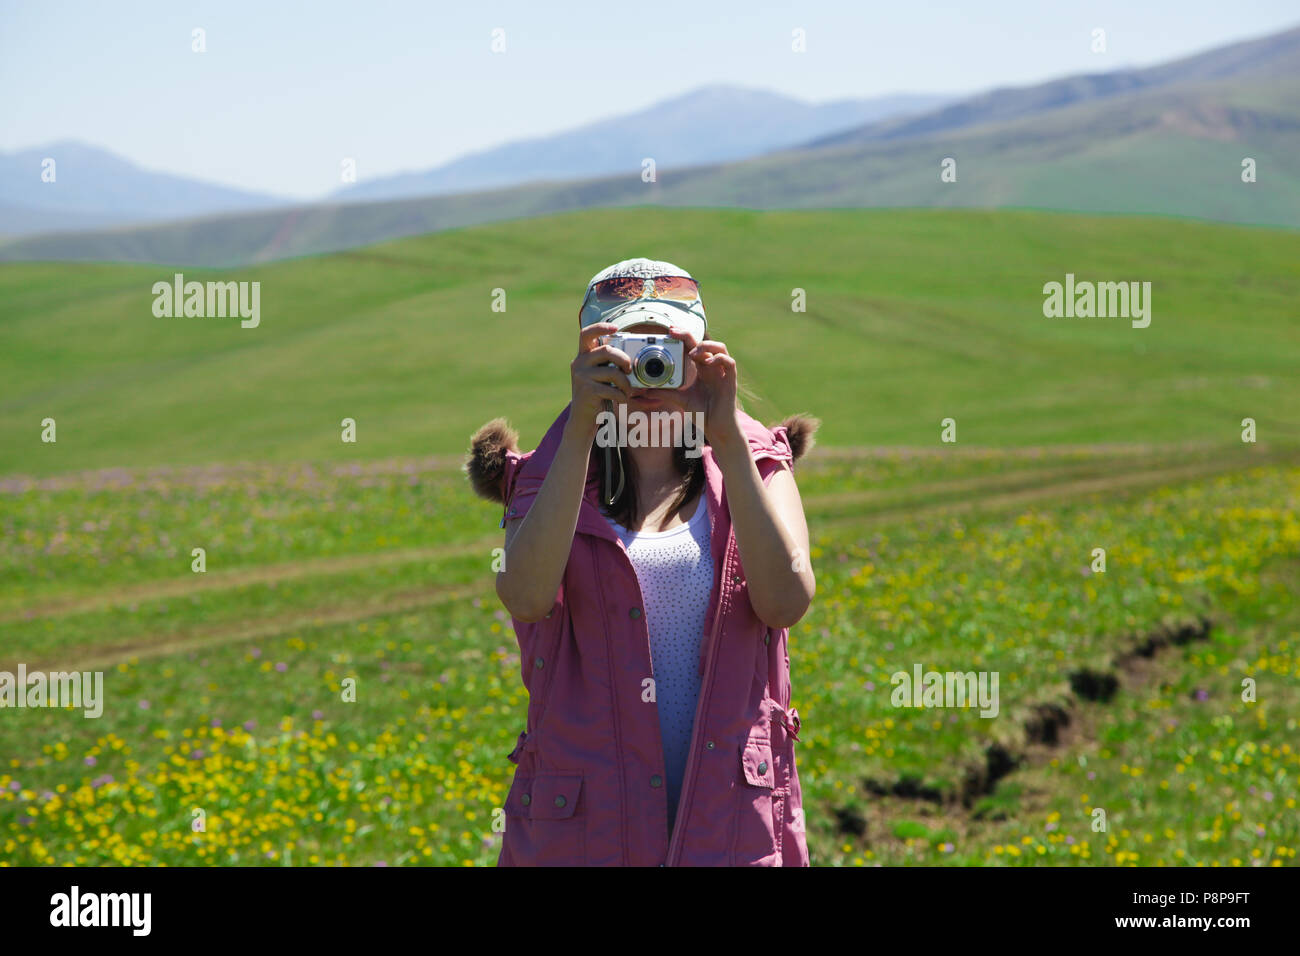 A woman in a pink waistcoat and a turquoise baseball cap photographs mountains Stock Photo